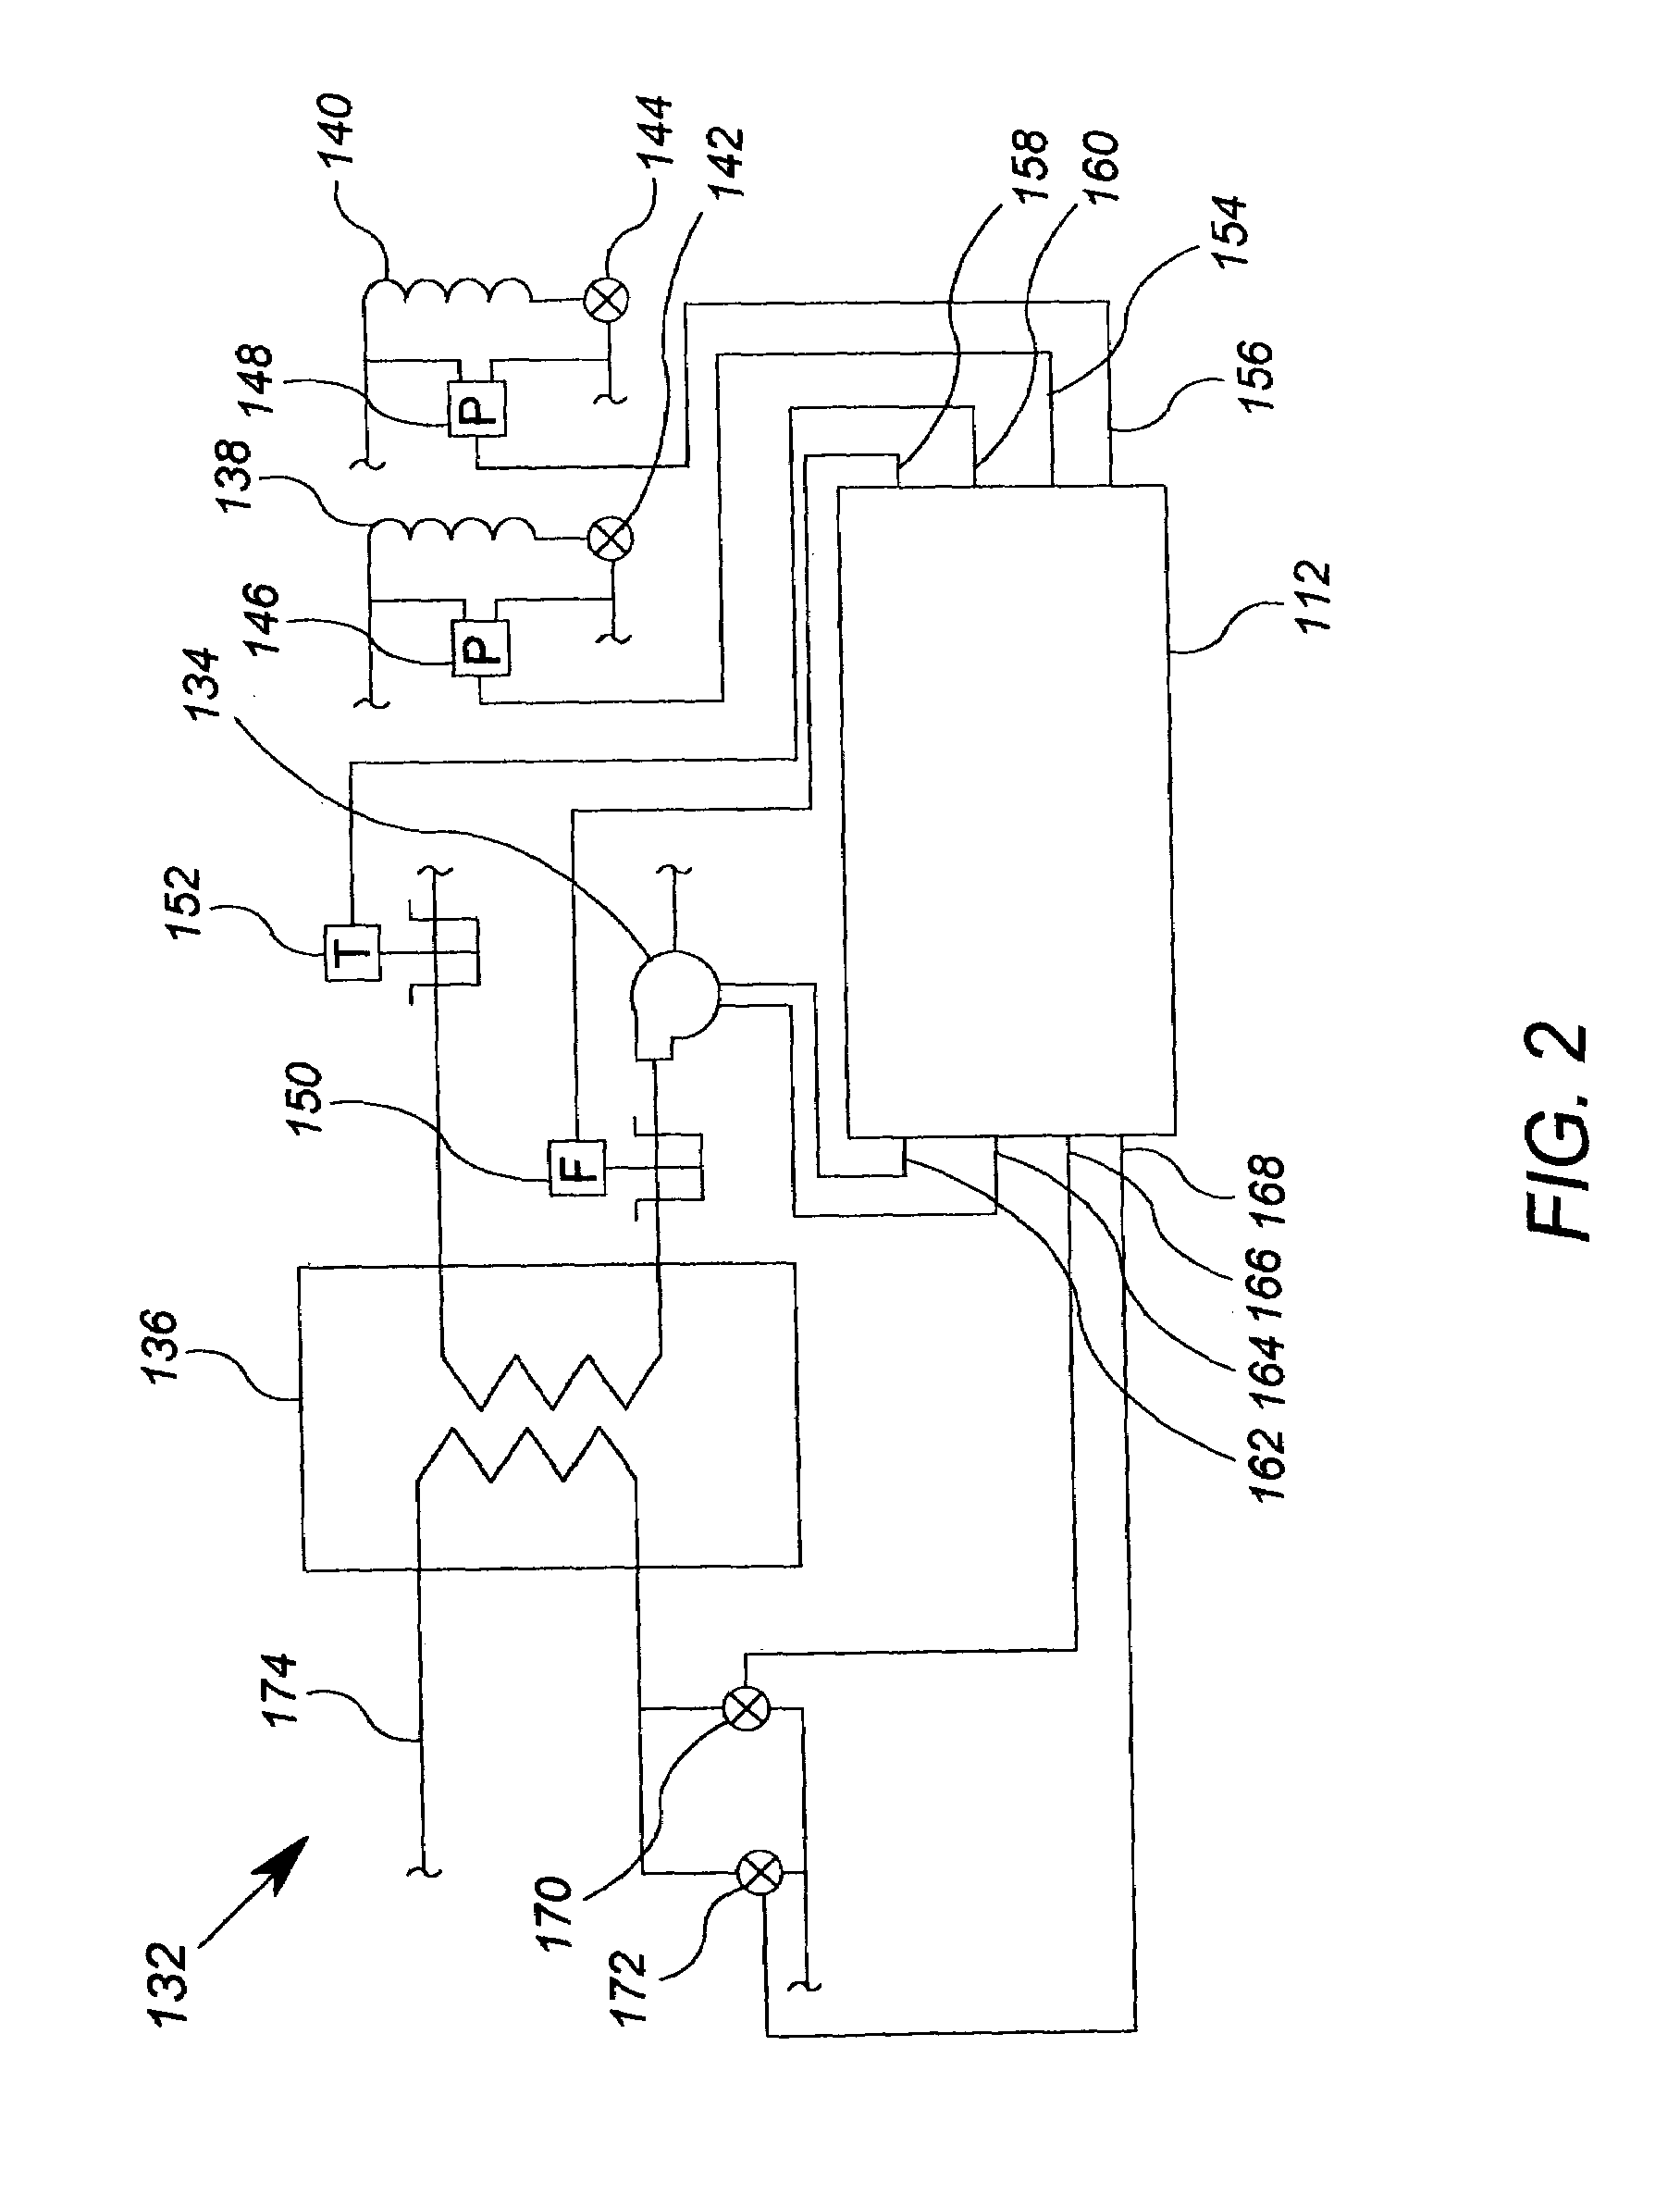 Controller with configurable connections between data processing components